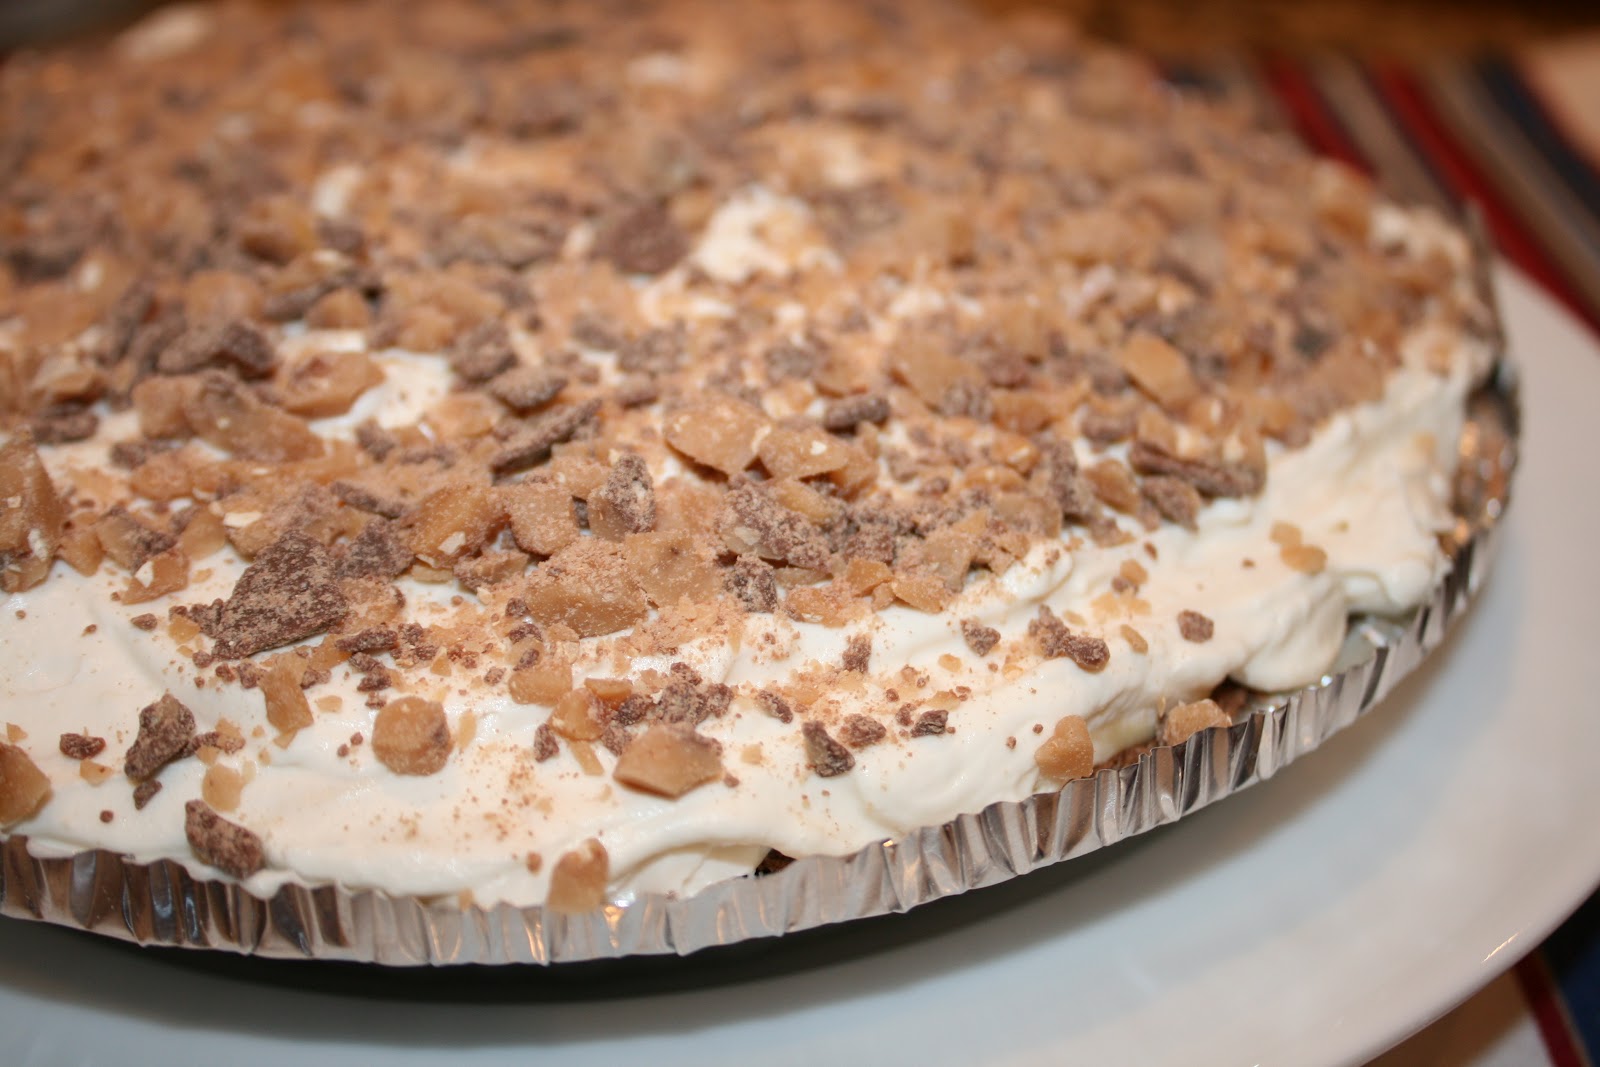 everything to entertain: Banoffee Pie (Dulce de Leche Banana Toffee Pie)